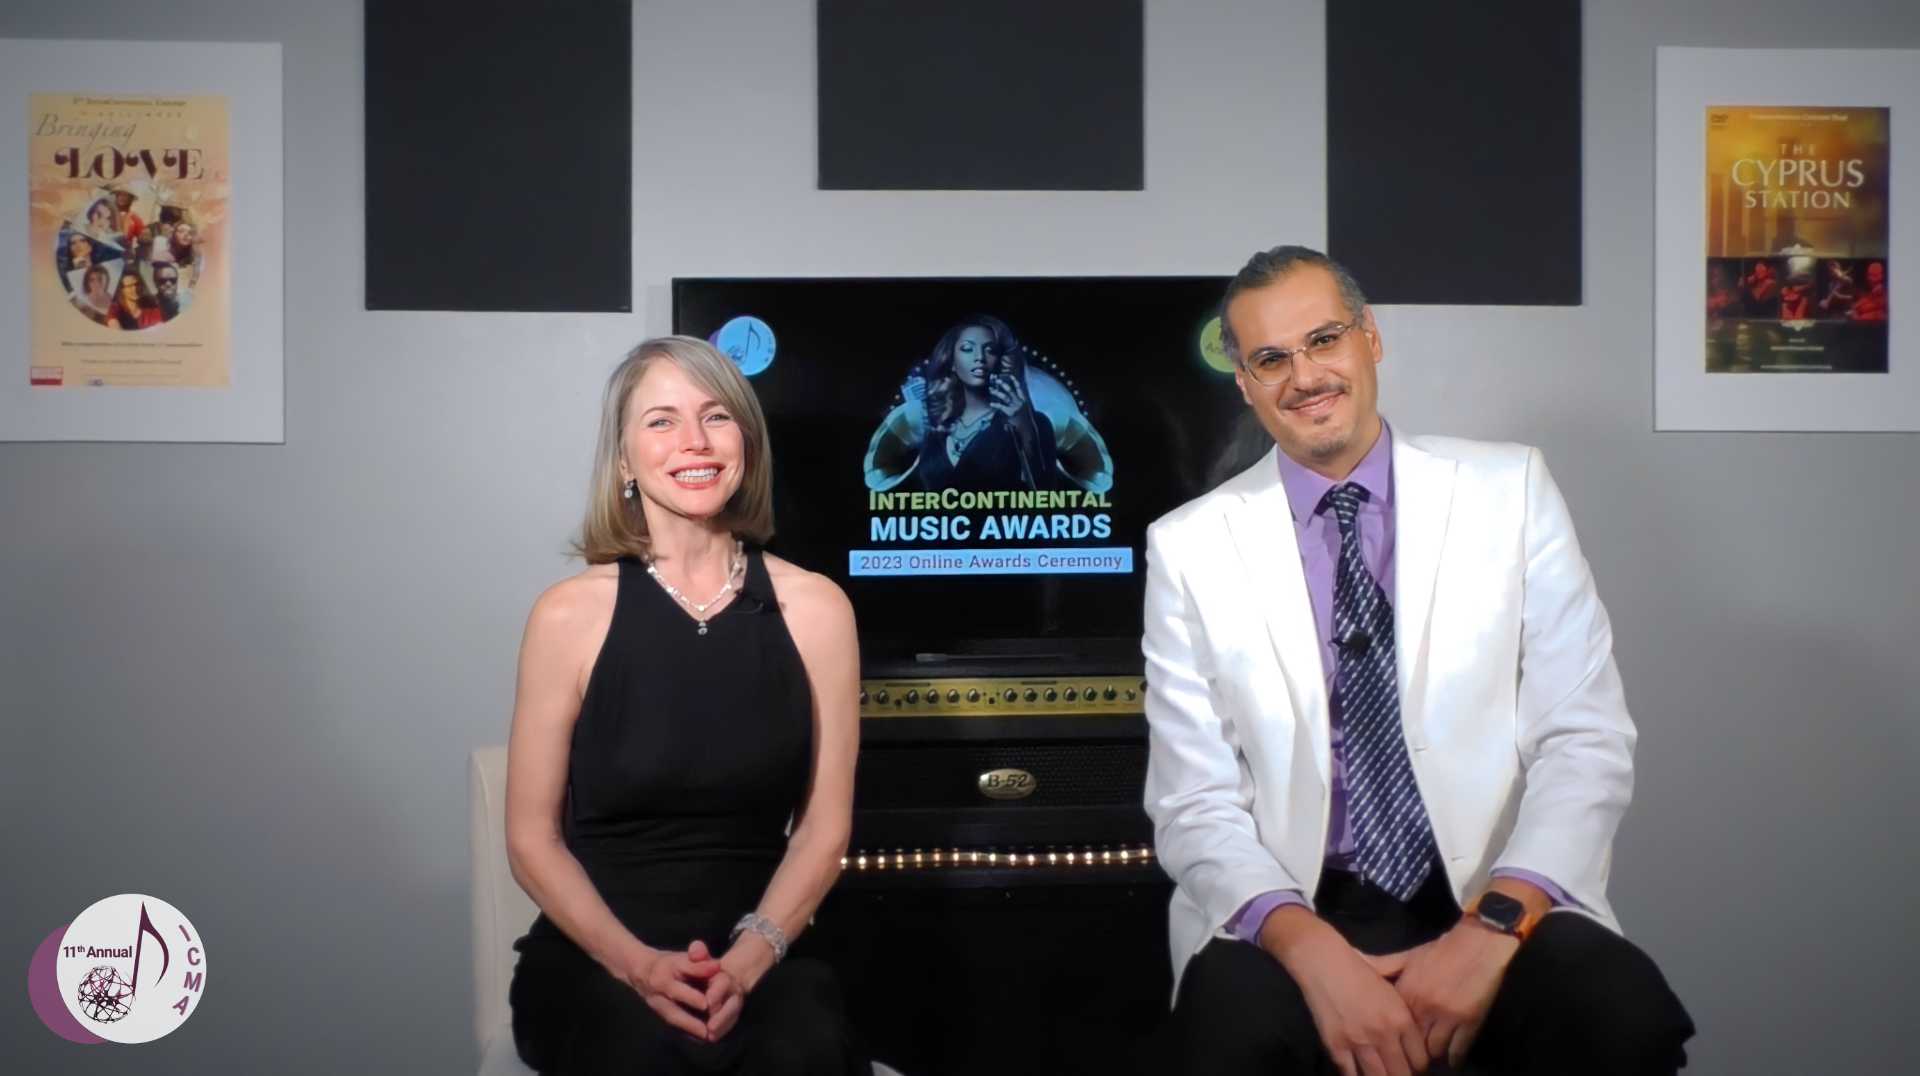 Shahed Mohseni and Karen Lorre presenting the 2023 InterContinental Music Awards online ceremony. Both are dressed in formal attire, in ICMAs office.